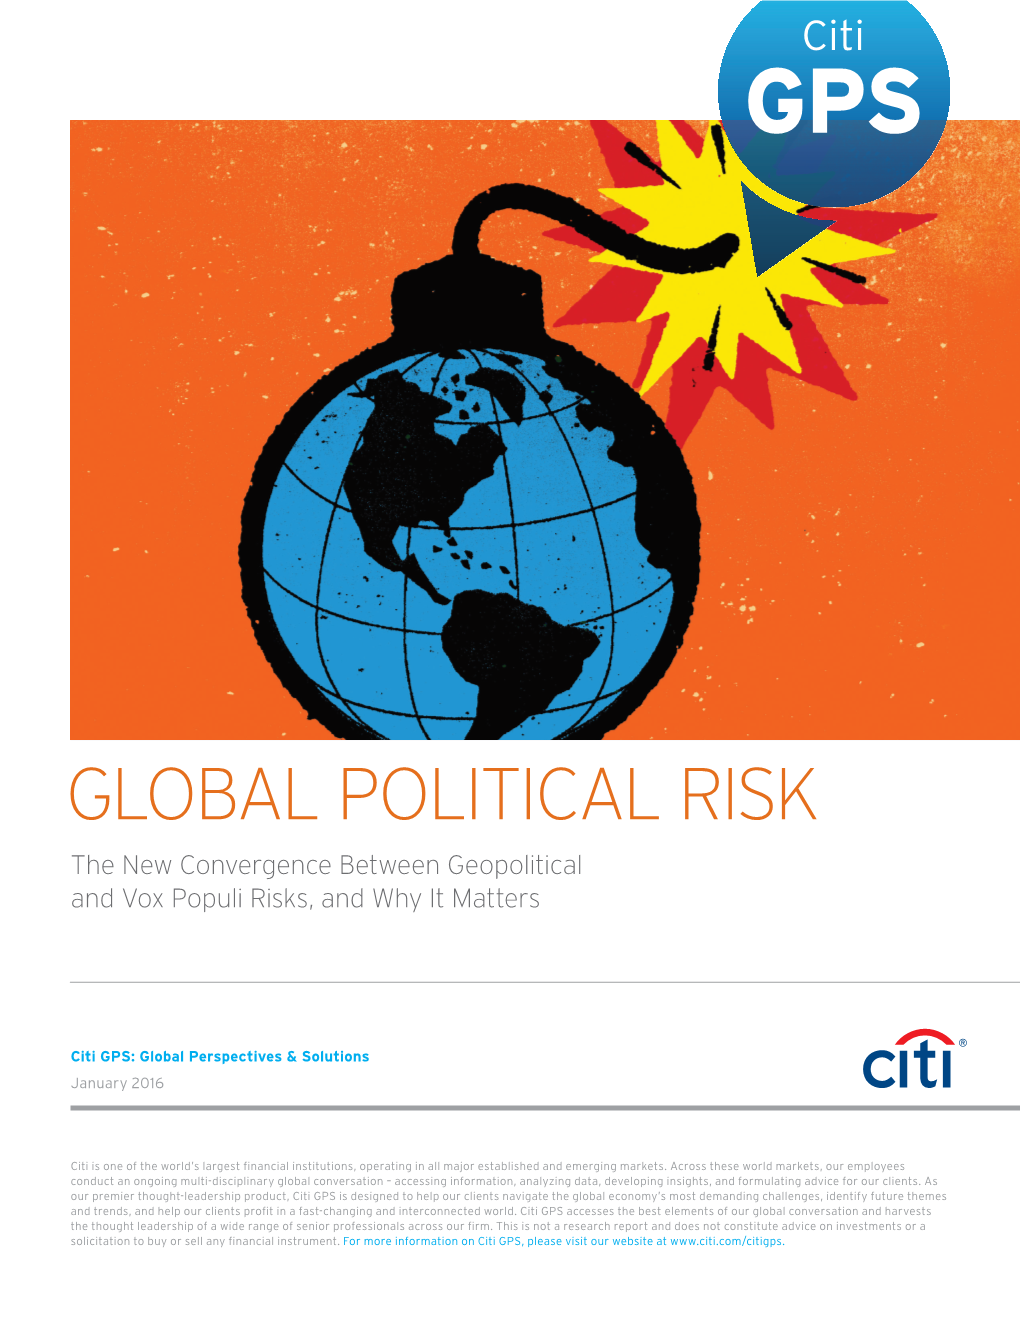 GLOBAL POLITICAL RISK the New Convergence Between Geopolitical and Vox Populi Risks, and Why It Matters